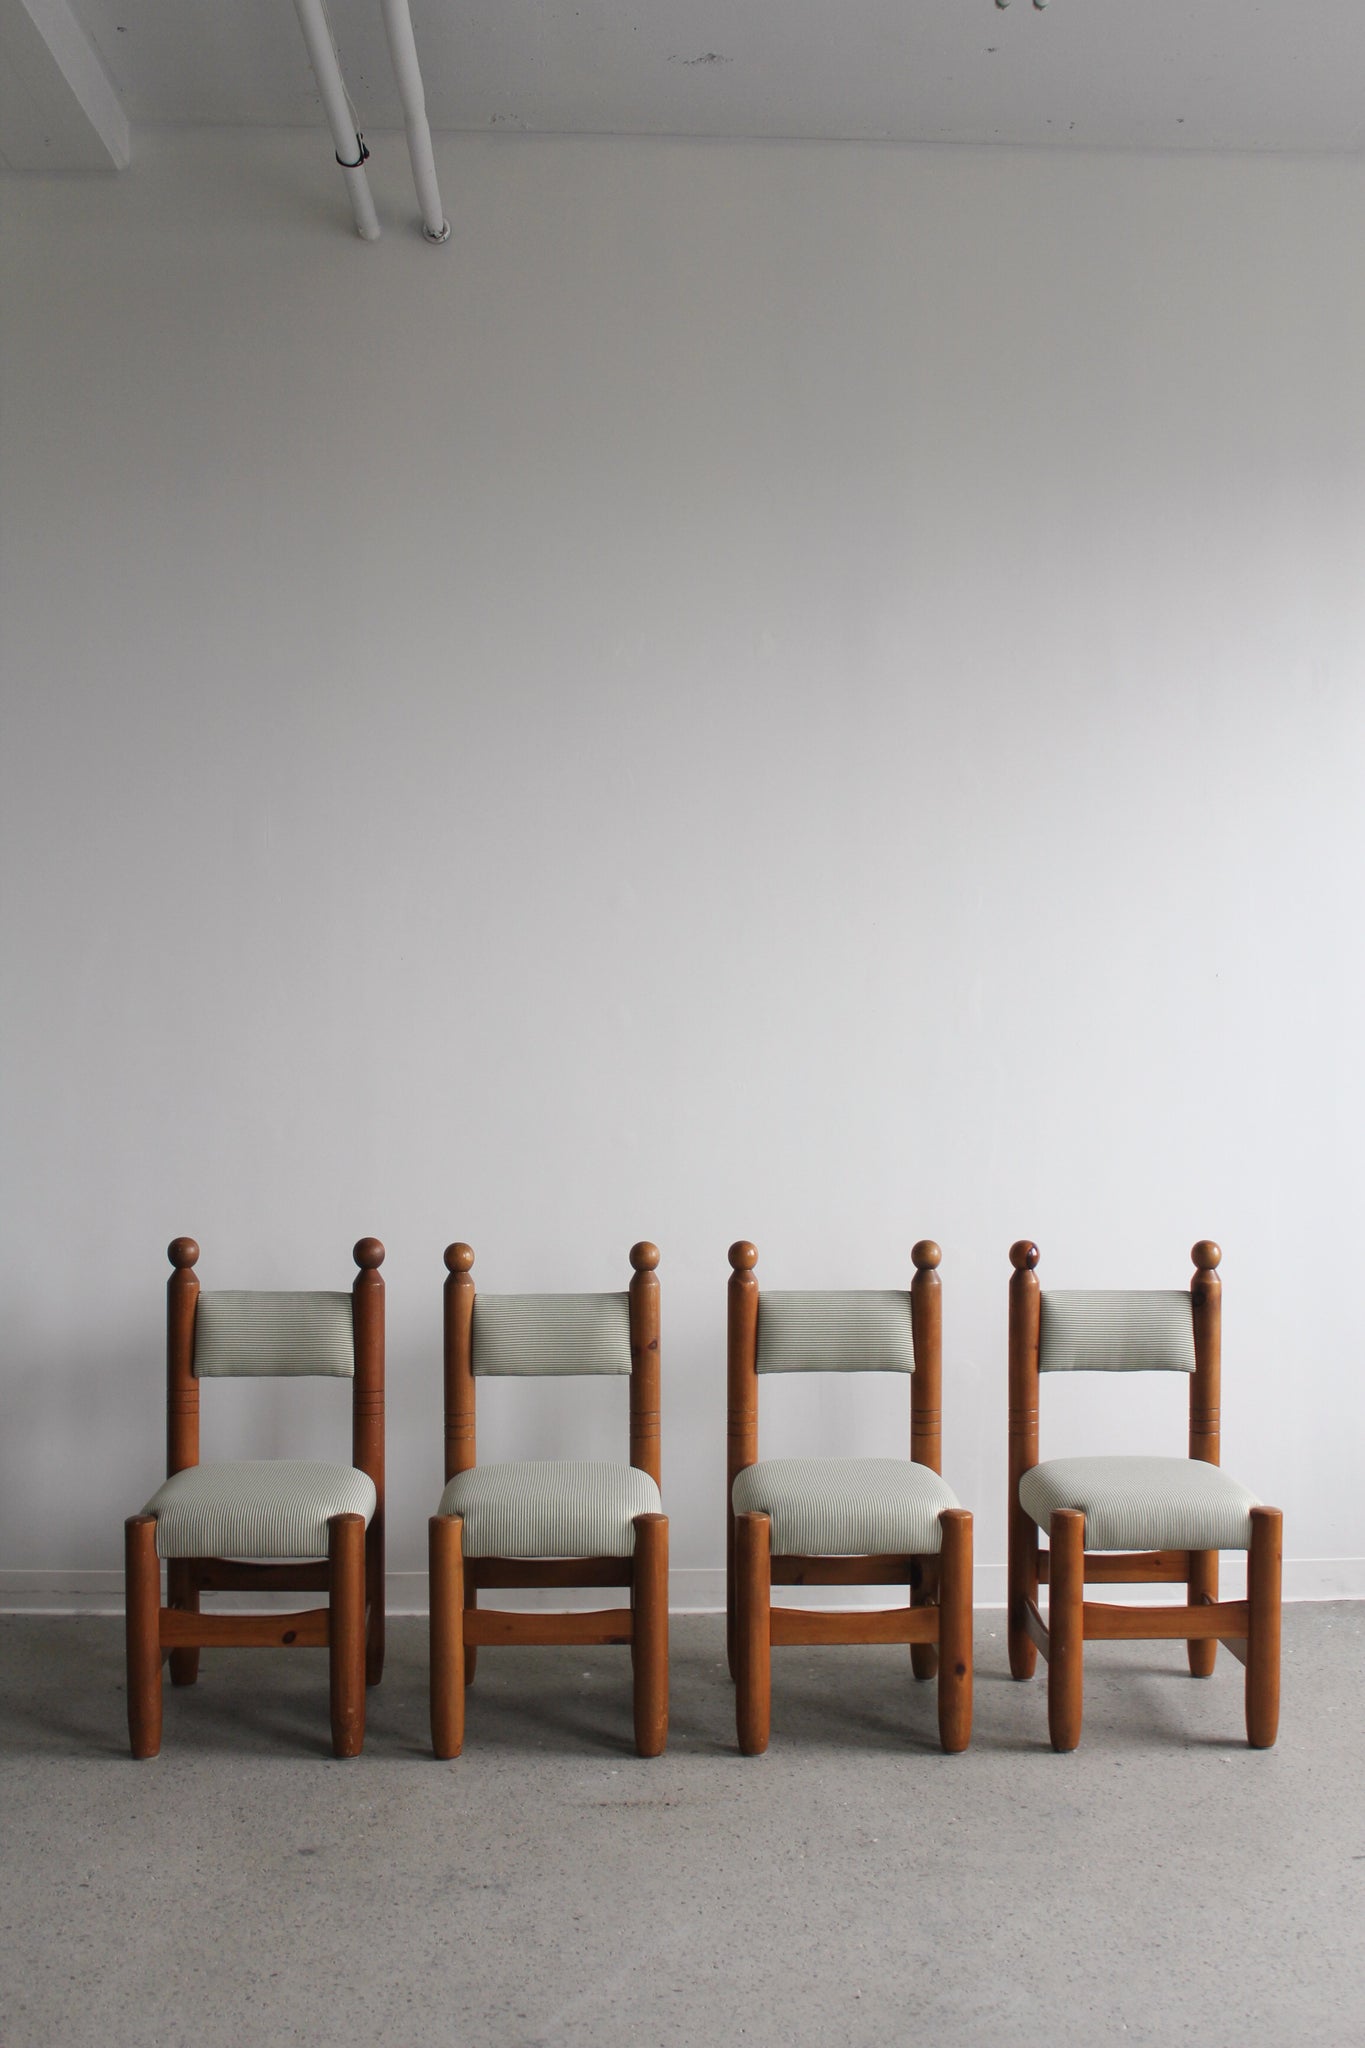 Pine Dining Chairs